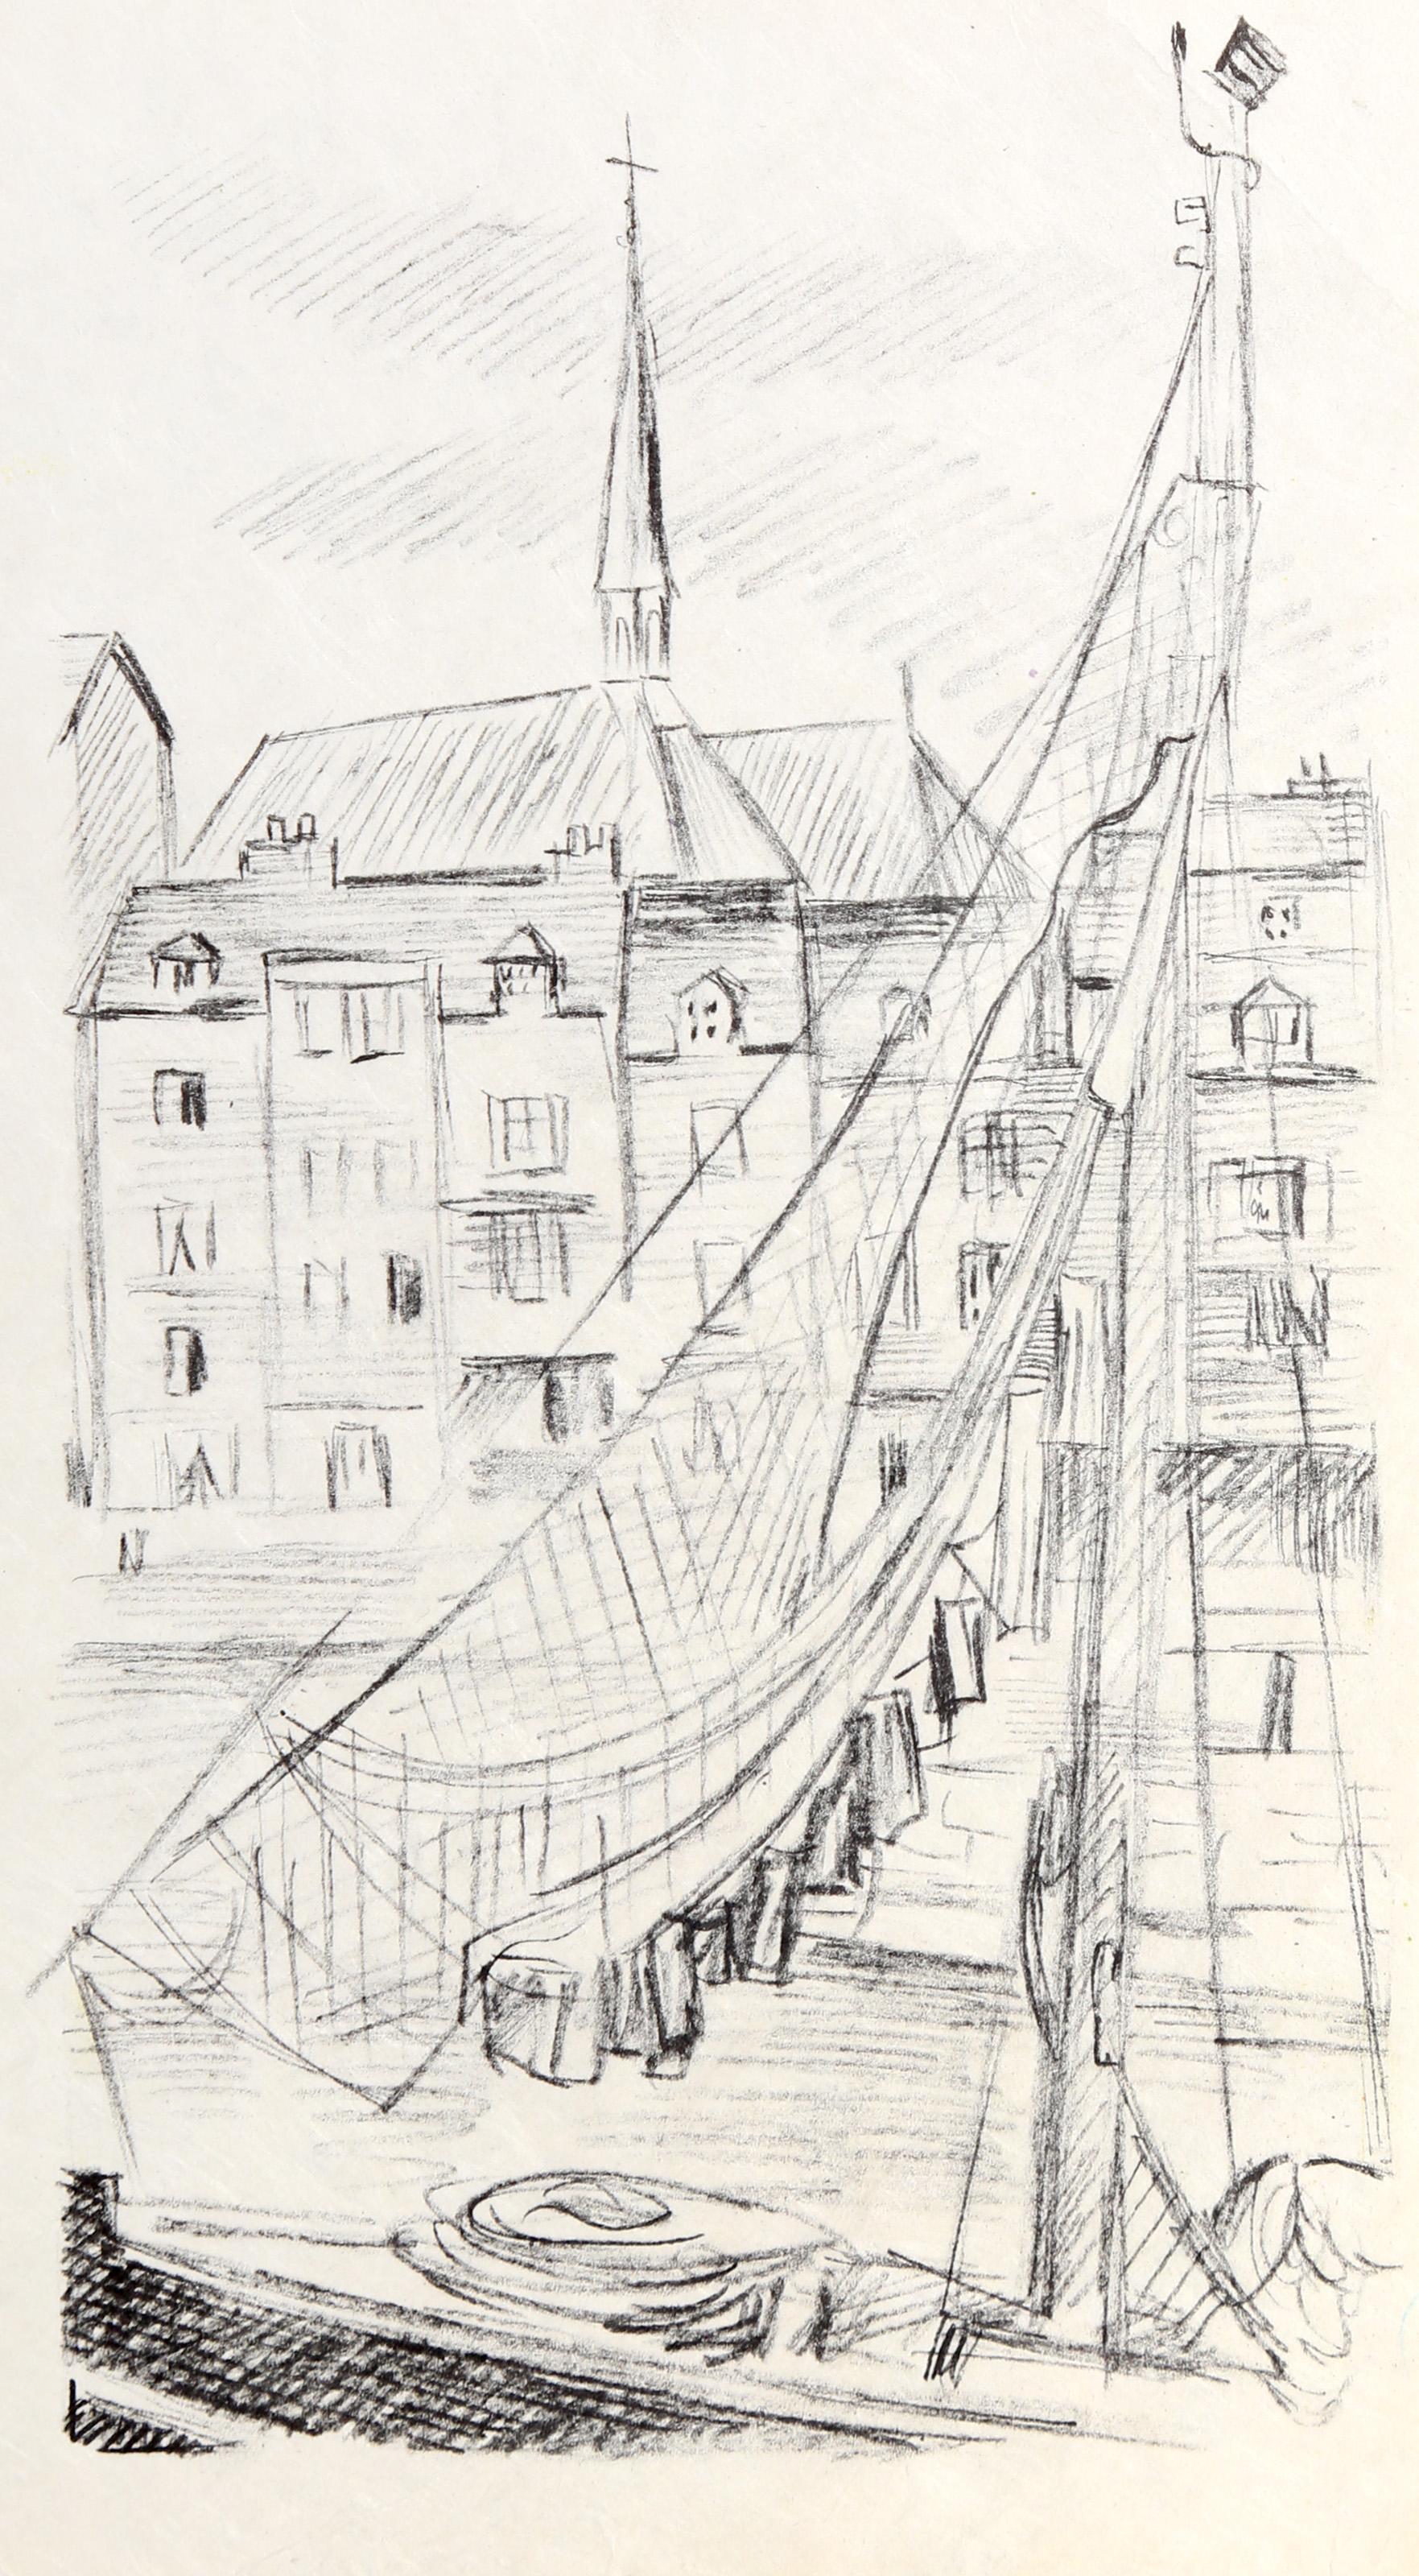 Laurent Marcel Salinas, Egyptian/French (1913 - 2010) -  Honfleur Harbor Sketch. Year: circa 1980, Medium: Lithograph, signed in pencil, Size: 8.5 x 4.5 in. (21.59 x 11.43 cm), Description: Laurent Marcel Salinas was a French artist, best known for